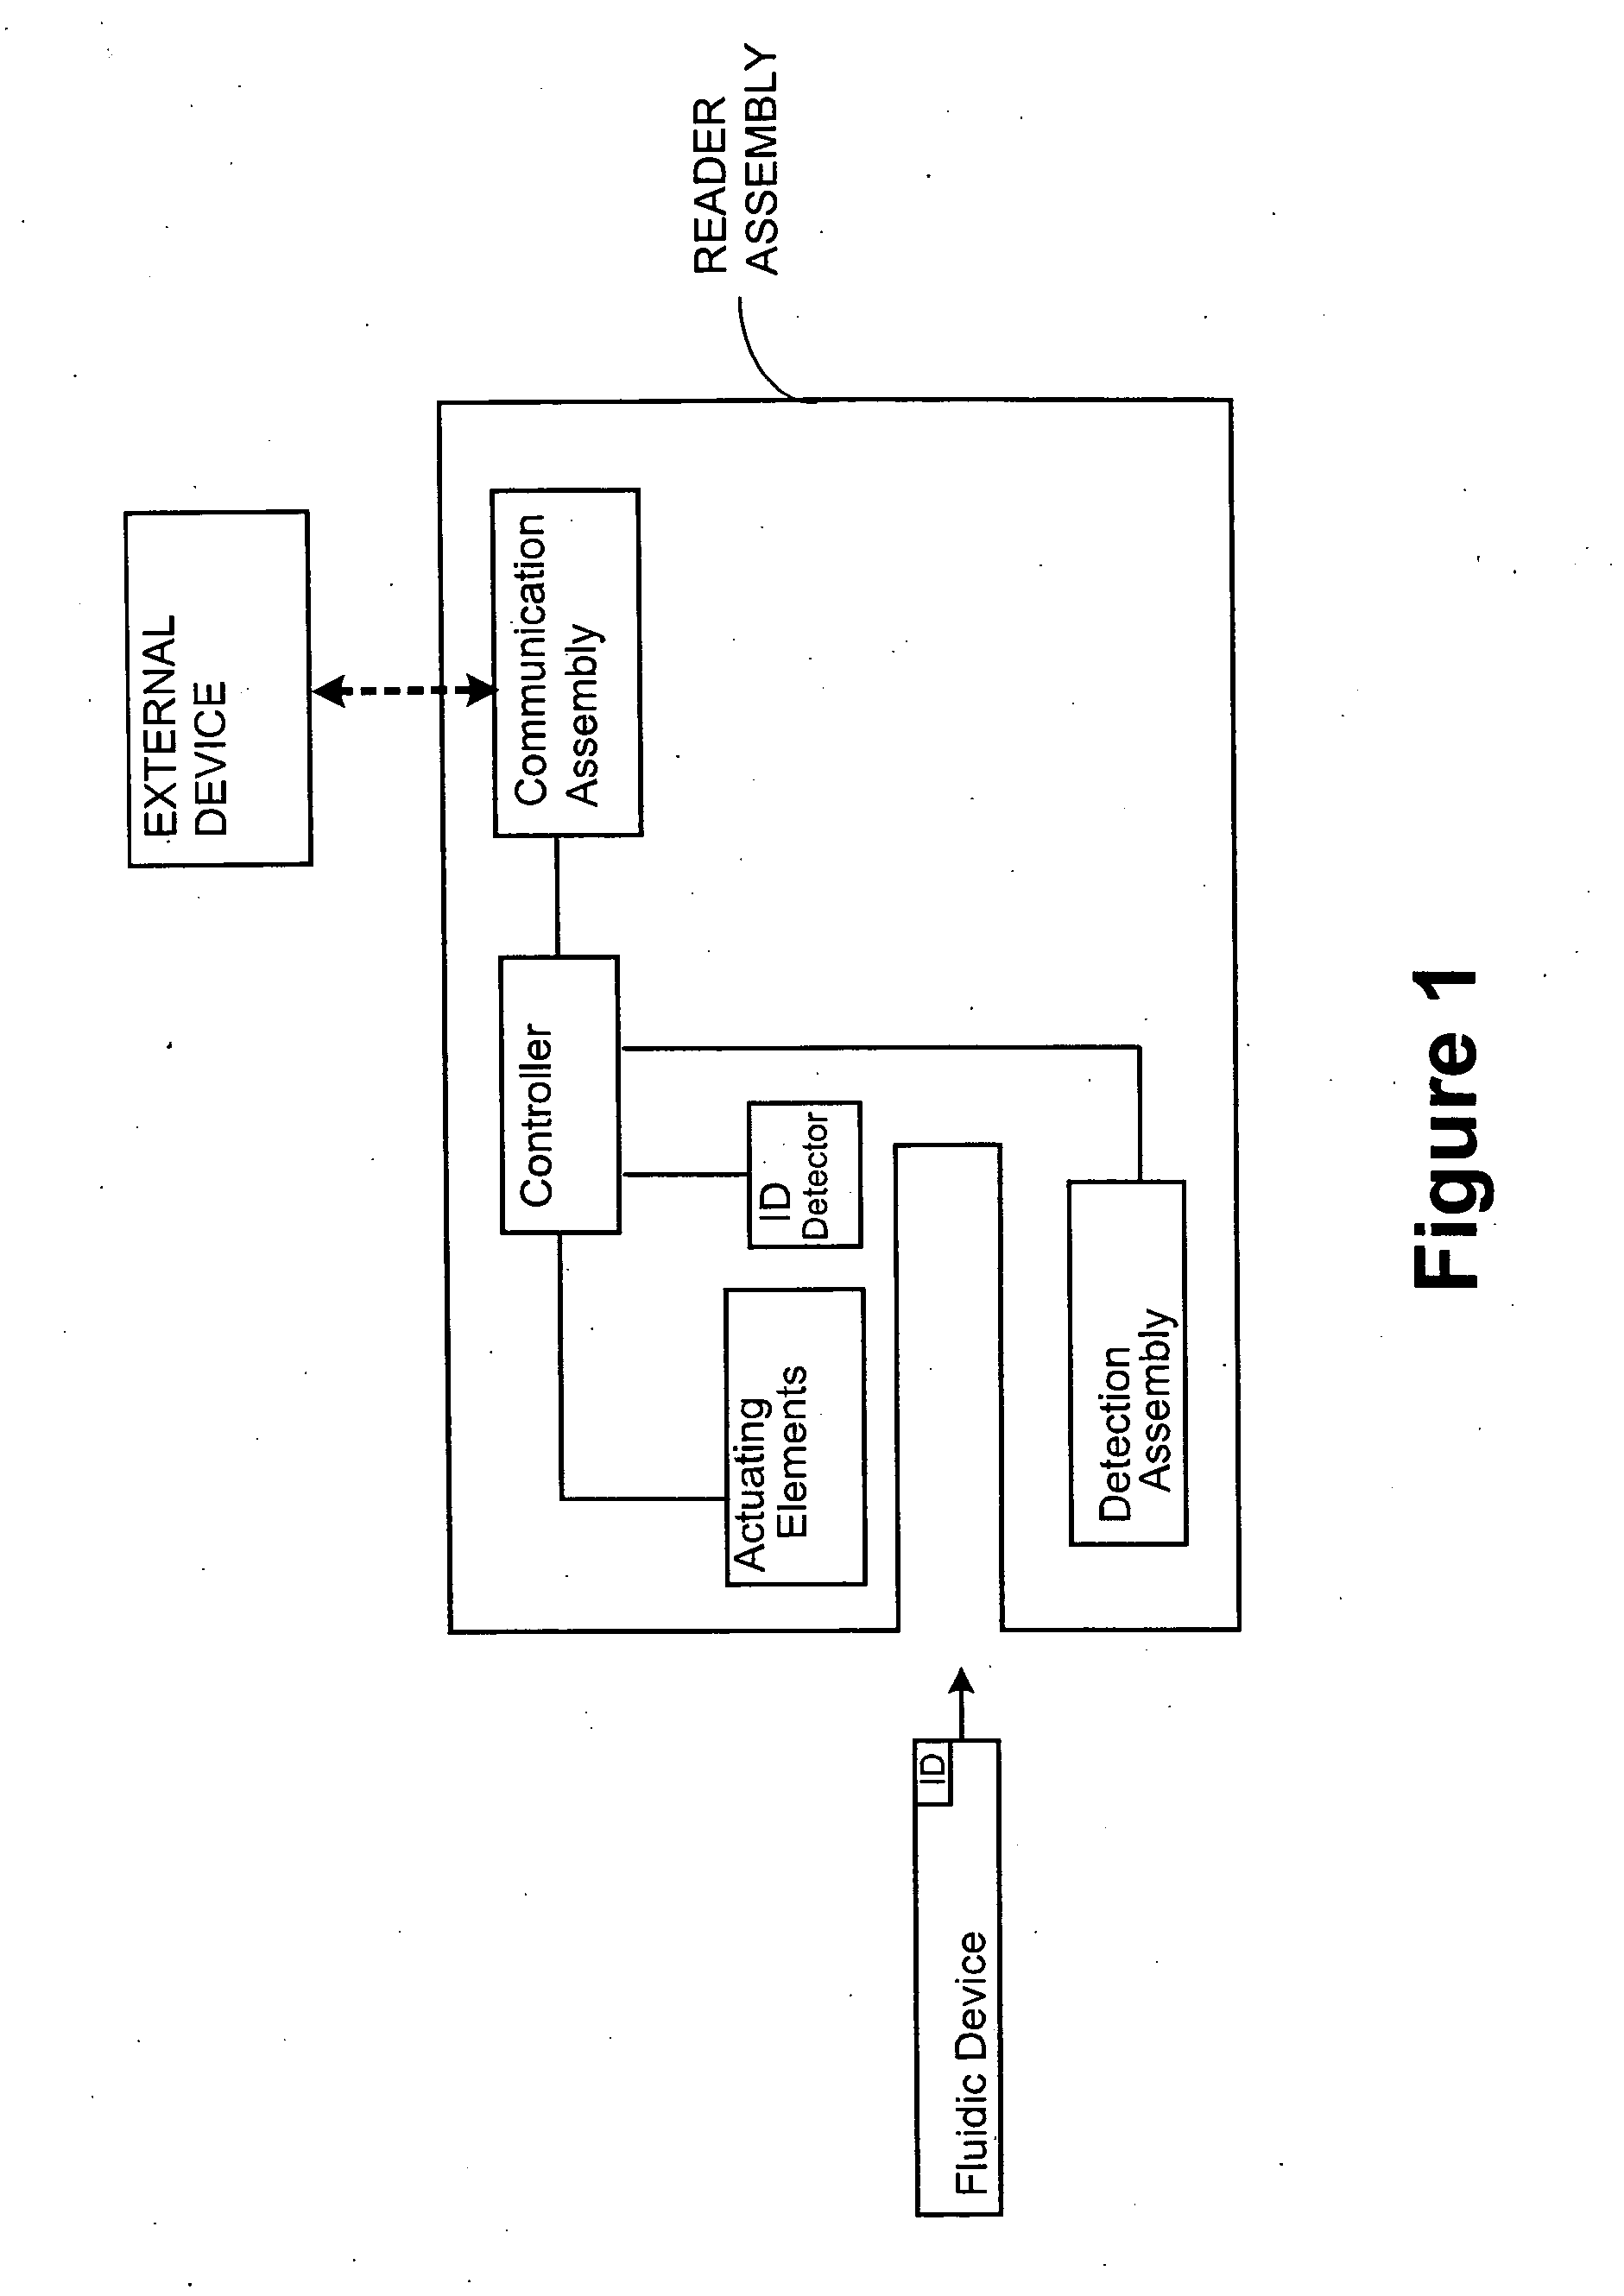 Systems and methods for monitoring pharmacological parameters